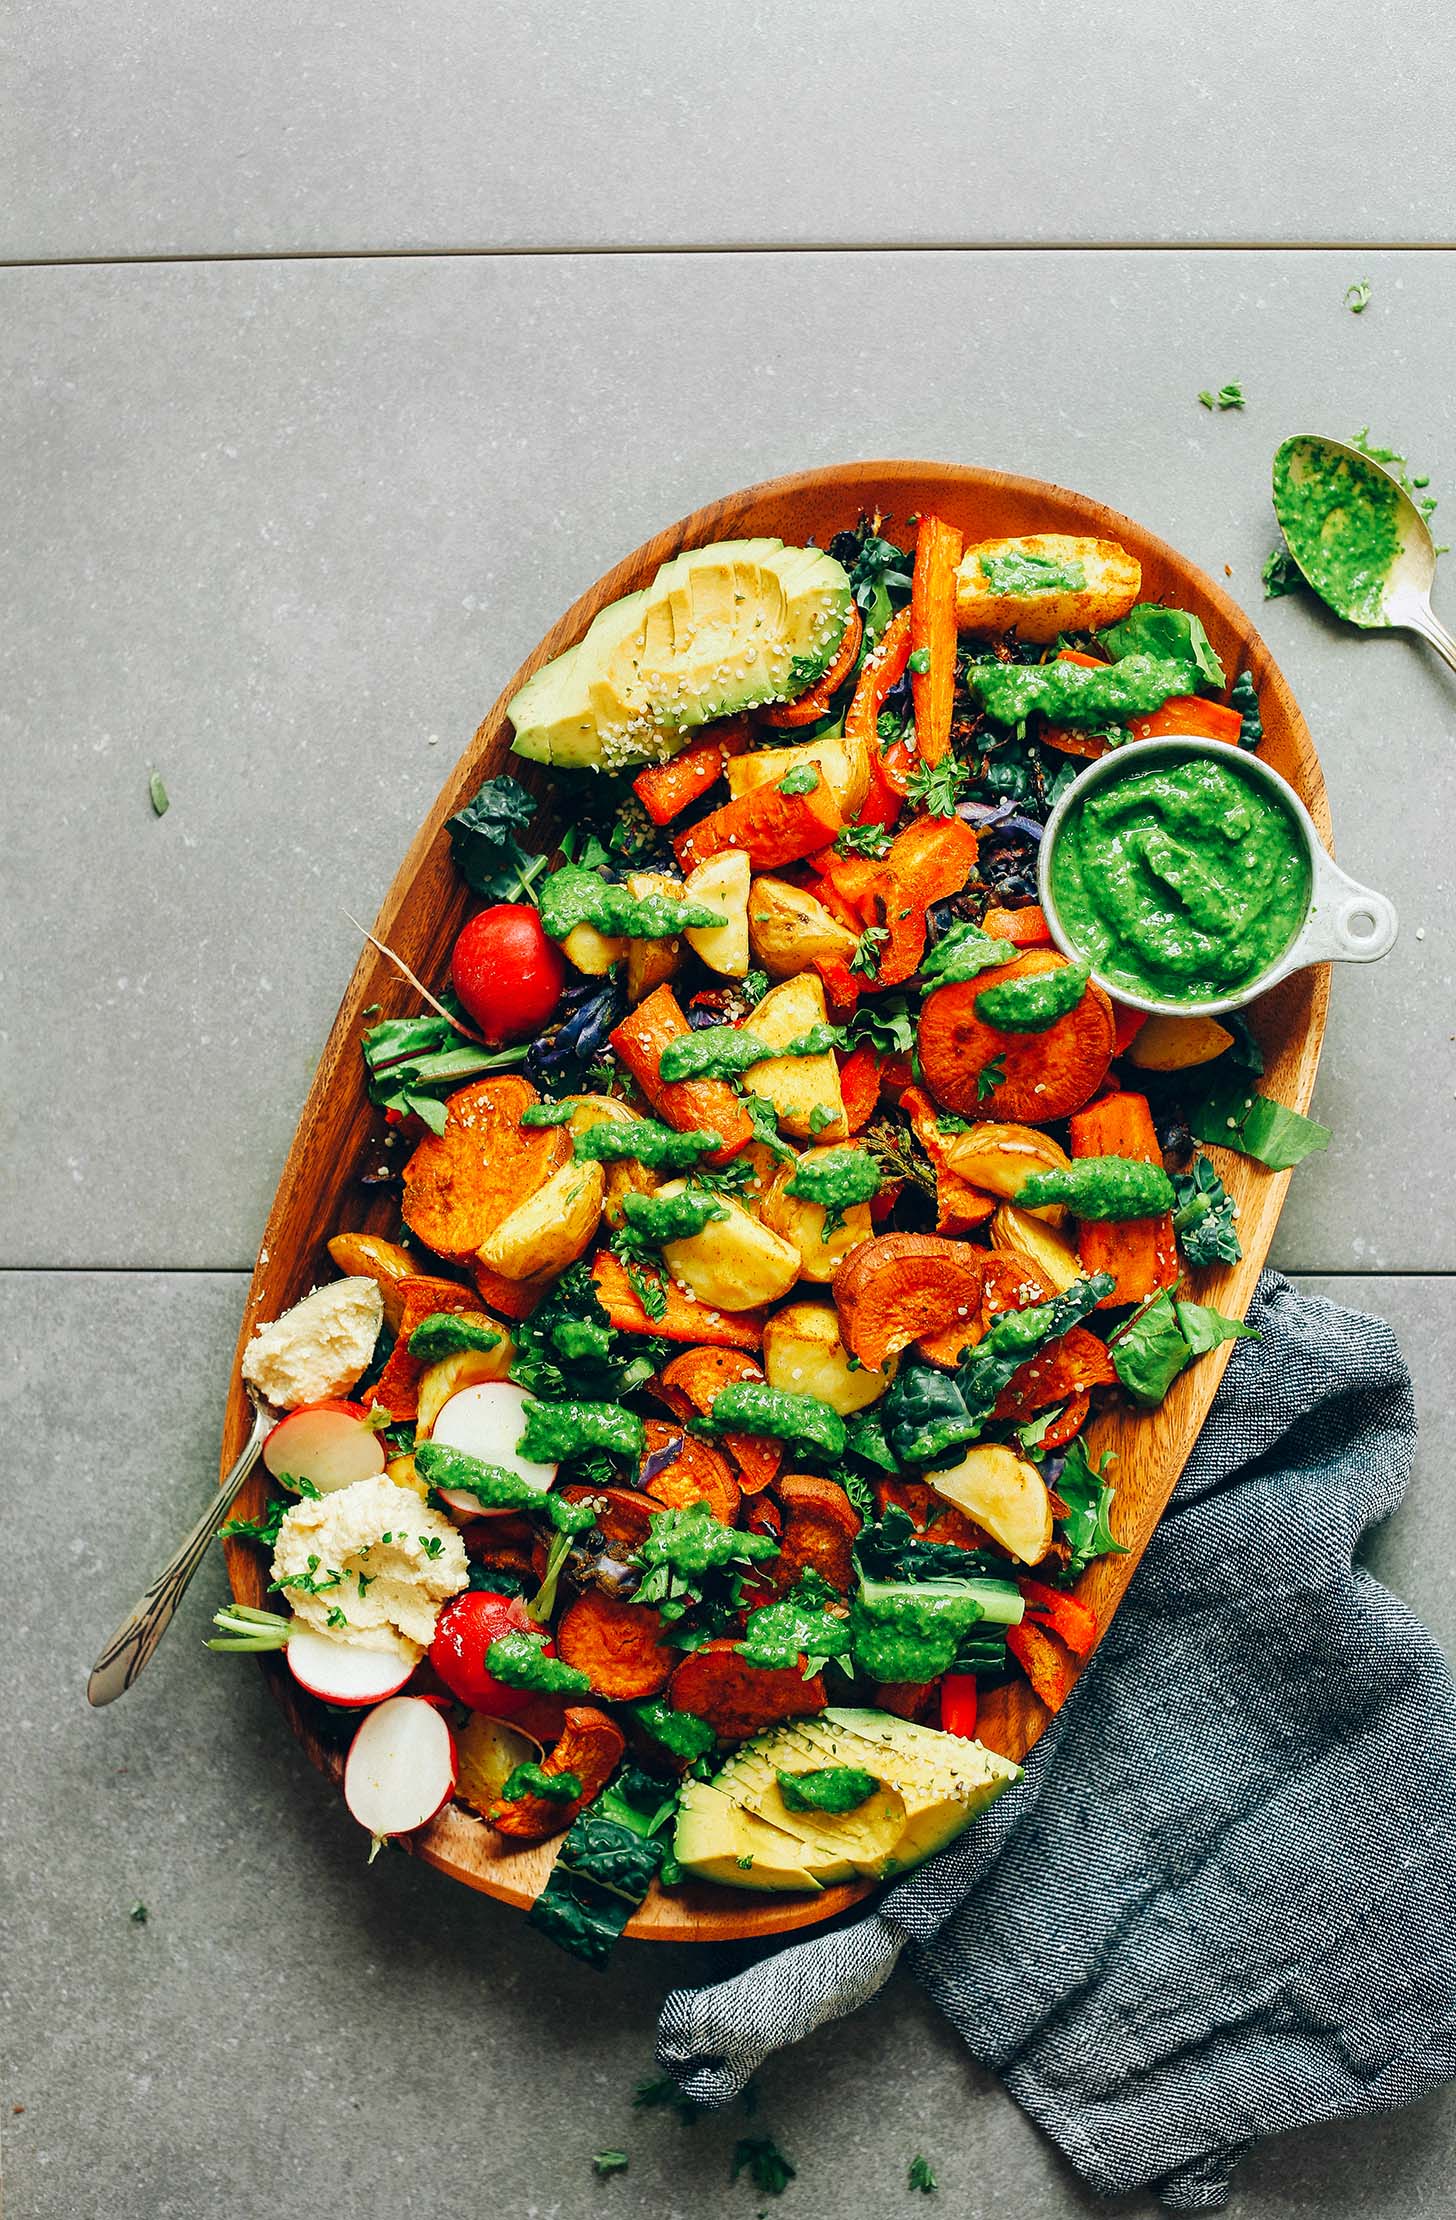 Wood platter with Roasted Vegetable Salad & Chimichurri for a gluten-free healthy meal